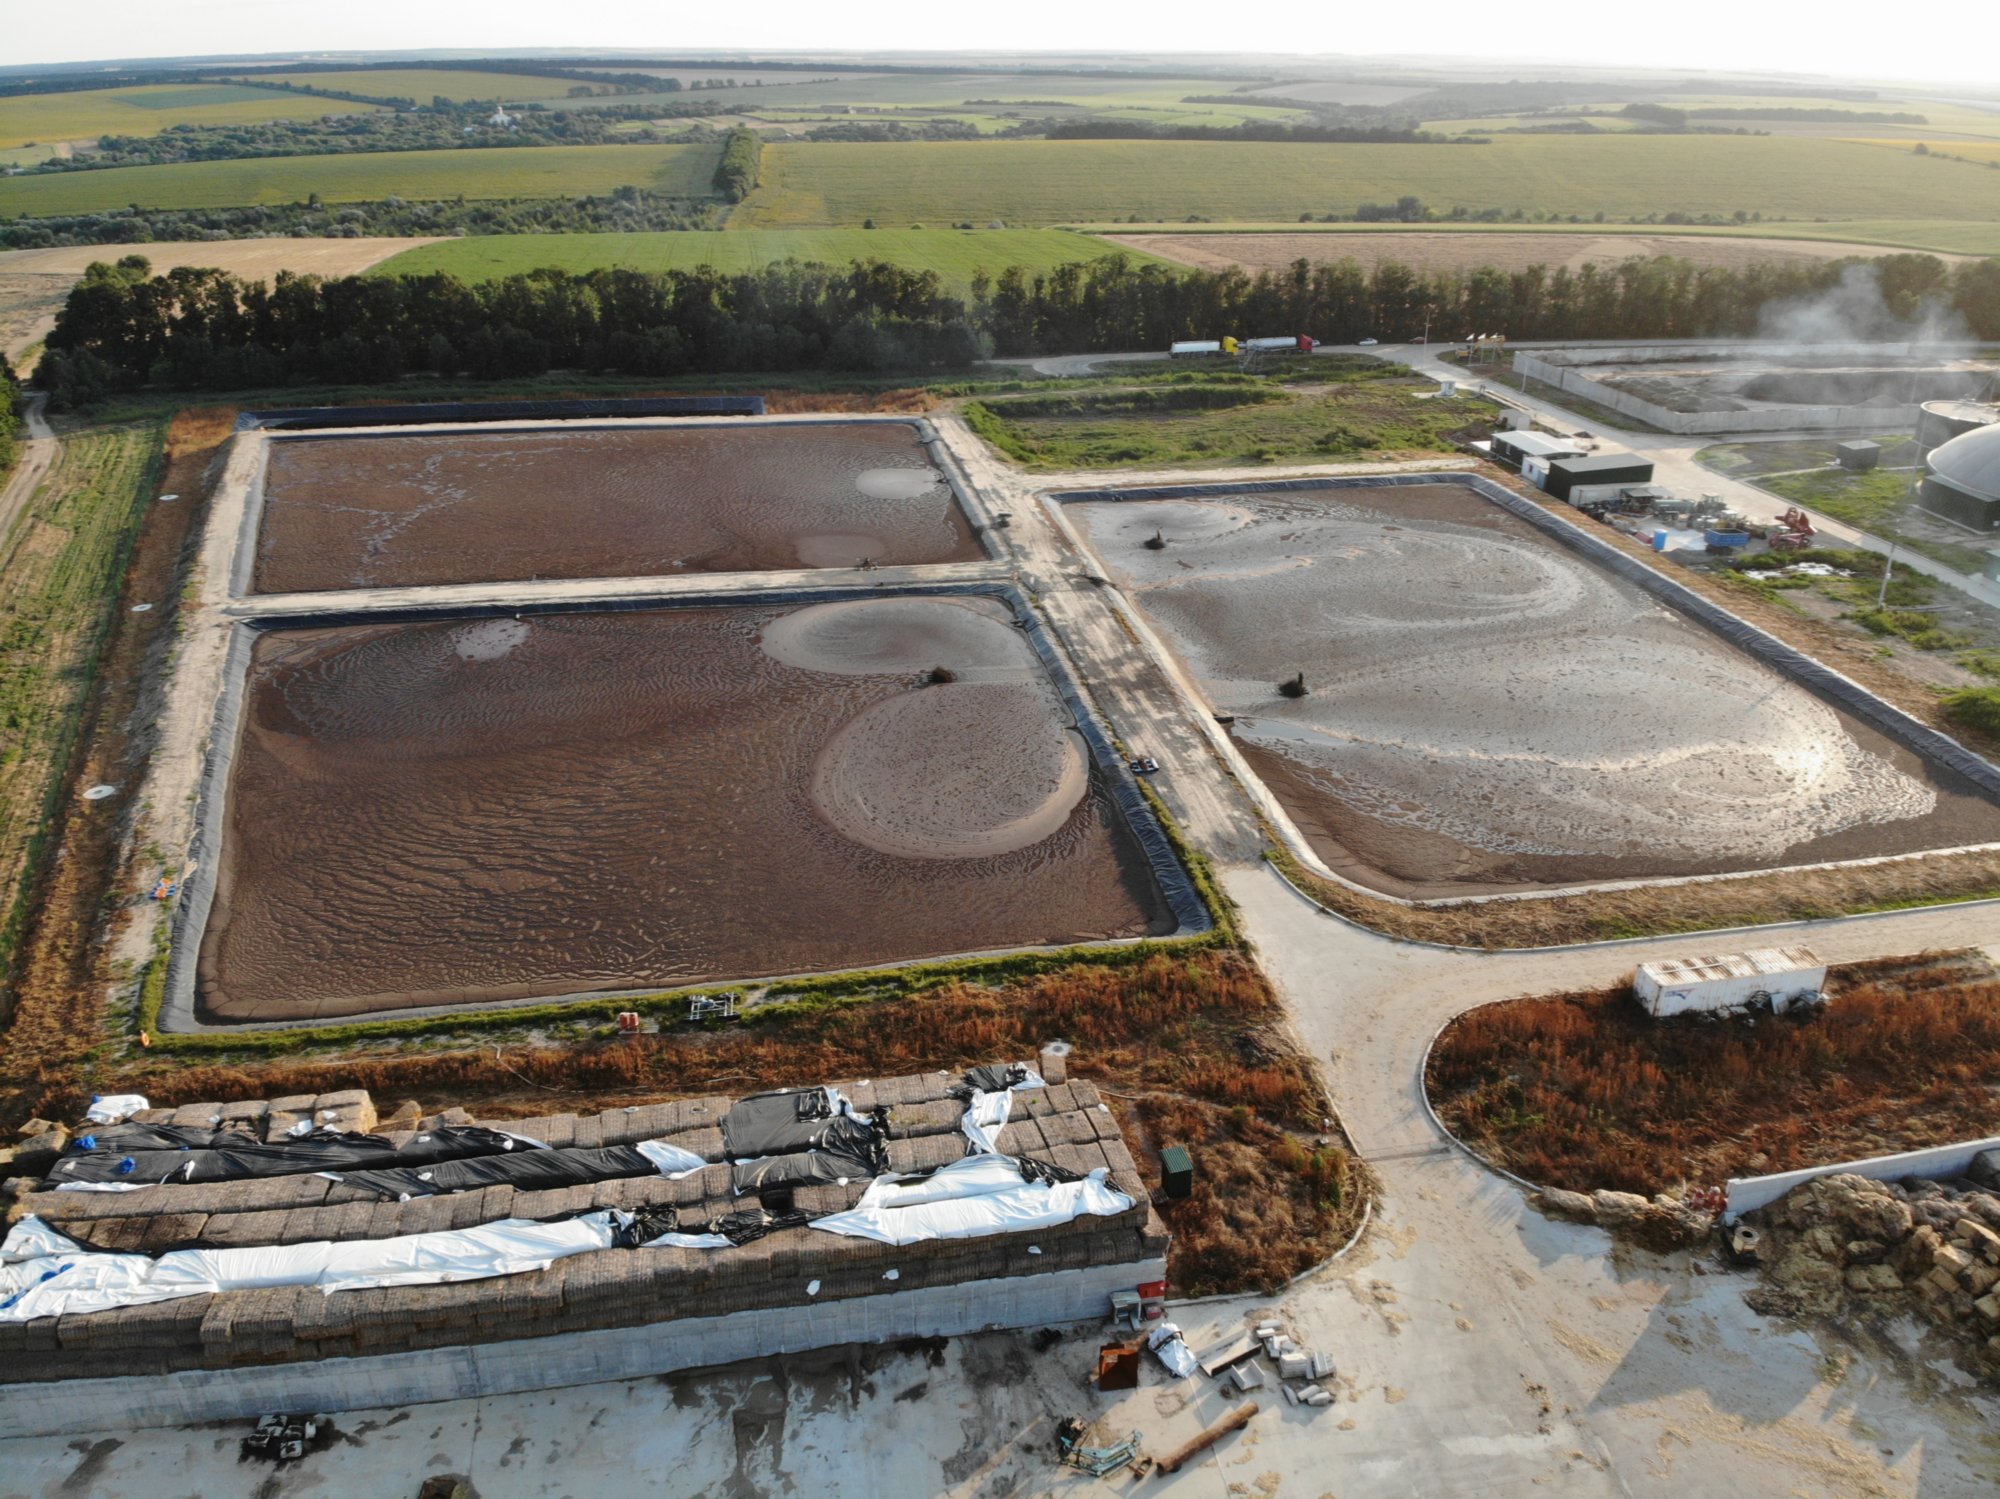 aerial view of wastewater treatment plant at sunse 2022 10 06 18 01 42 utc